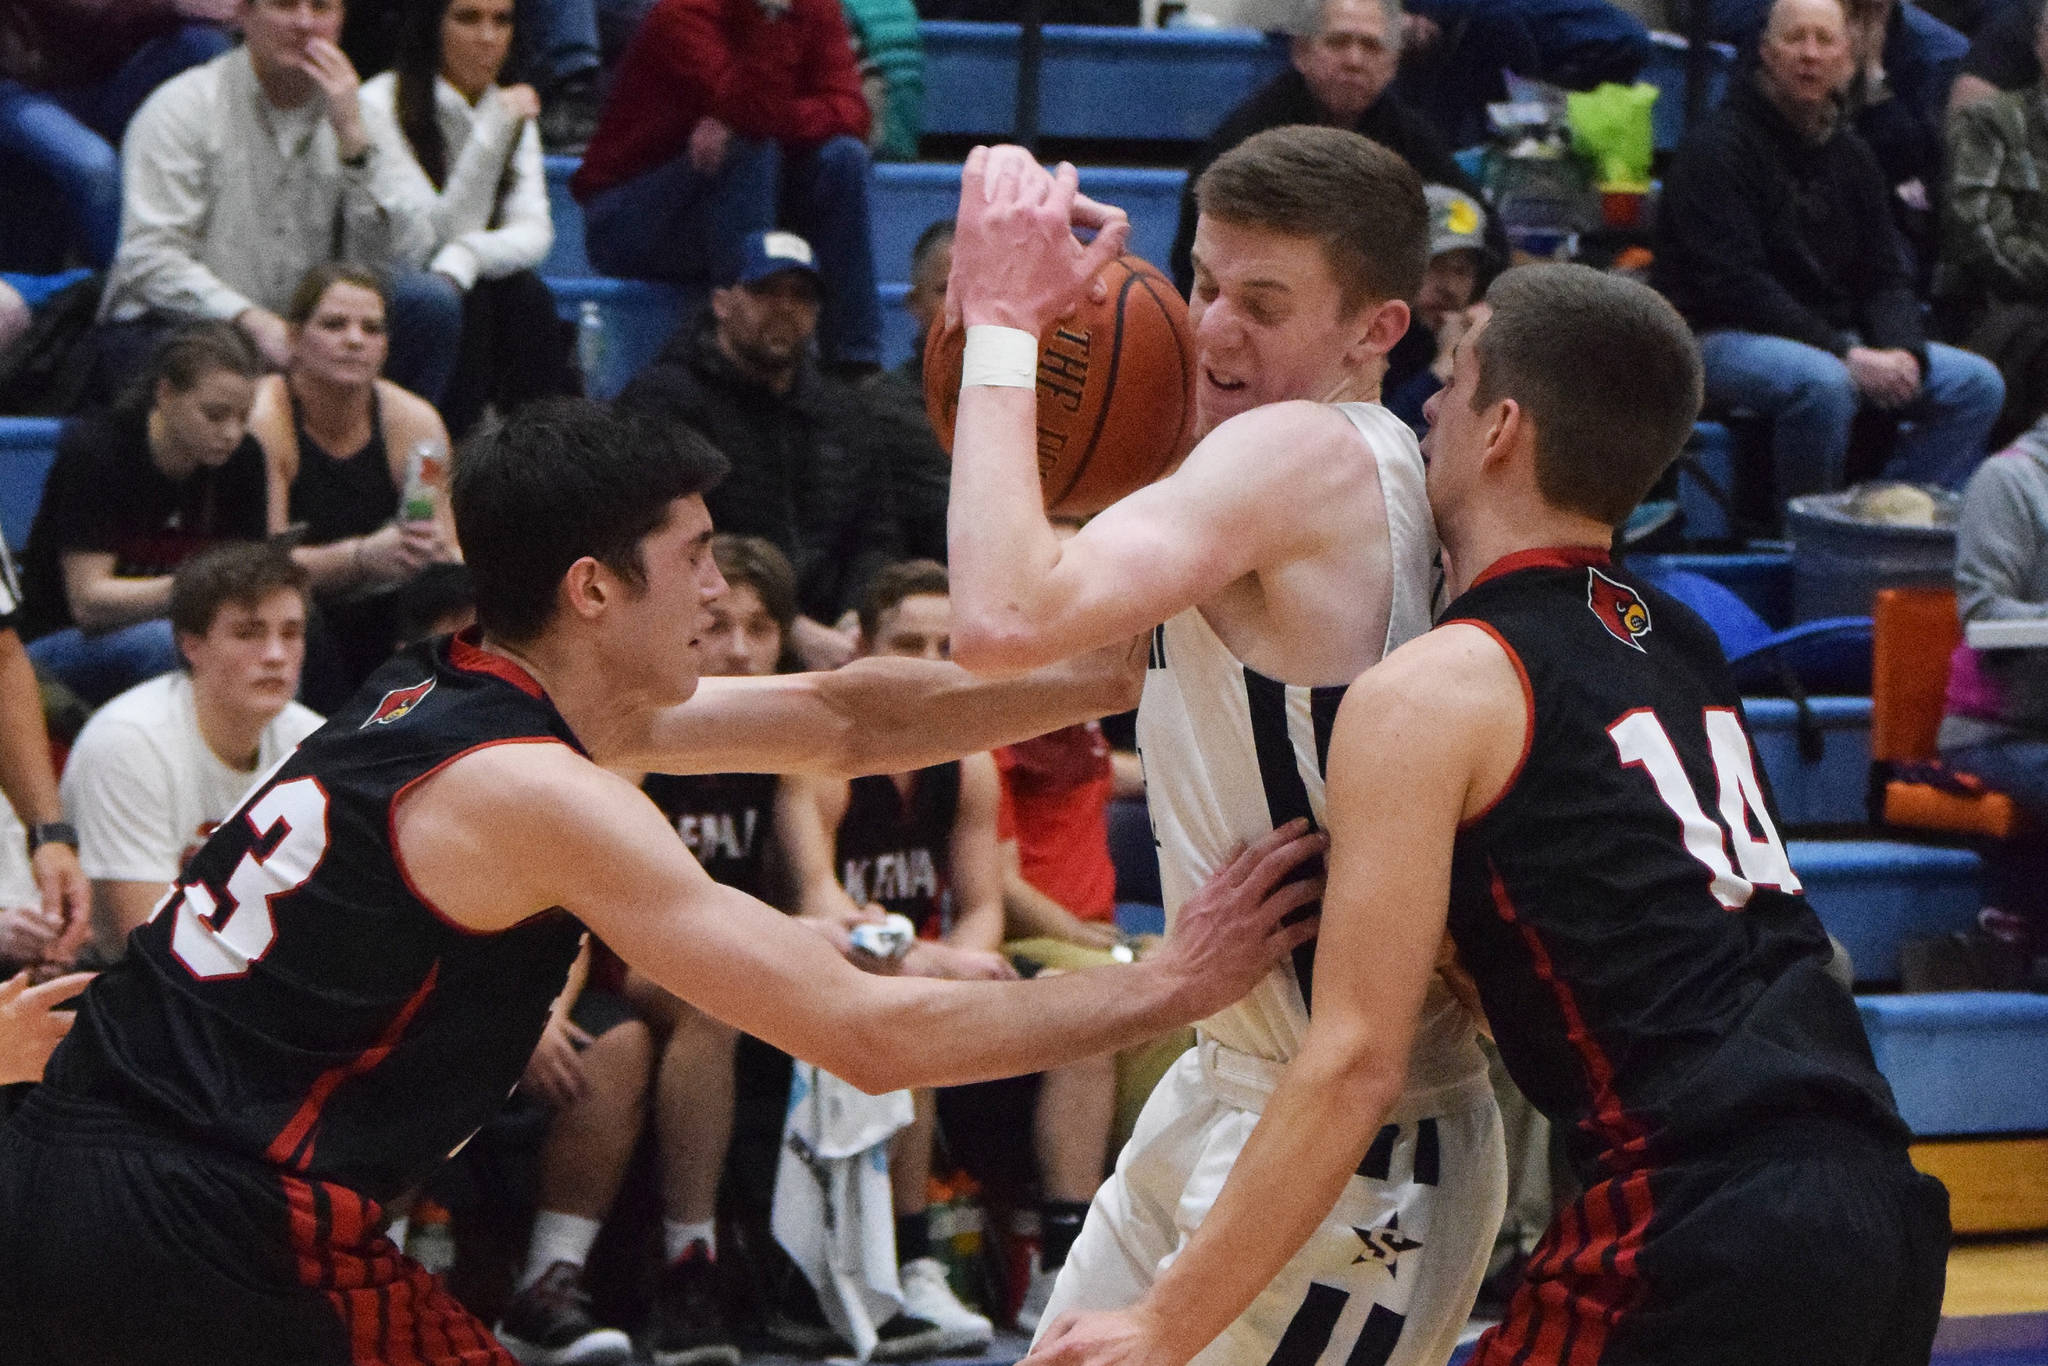 Soldotna’s Ray Chumley (middle) becomes sandwiched between Kenai’s Adam Trujillo (left) and Logan Baker Tuesday in a nonconference contest at Soldotna High School. (Photo by Joey Klecka/Peninsula Clarion)